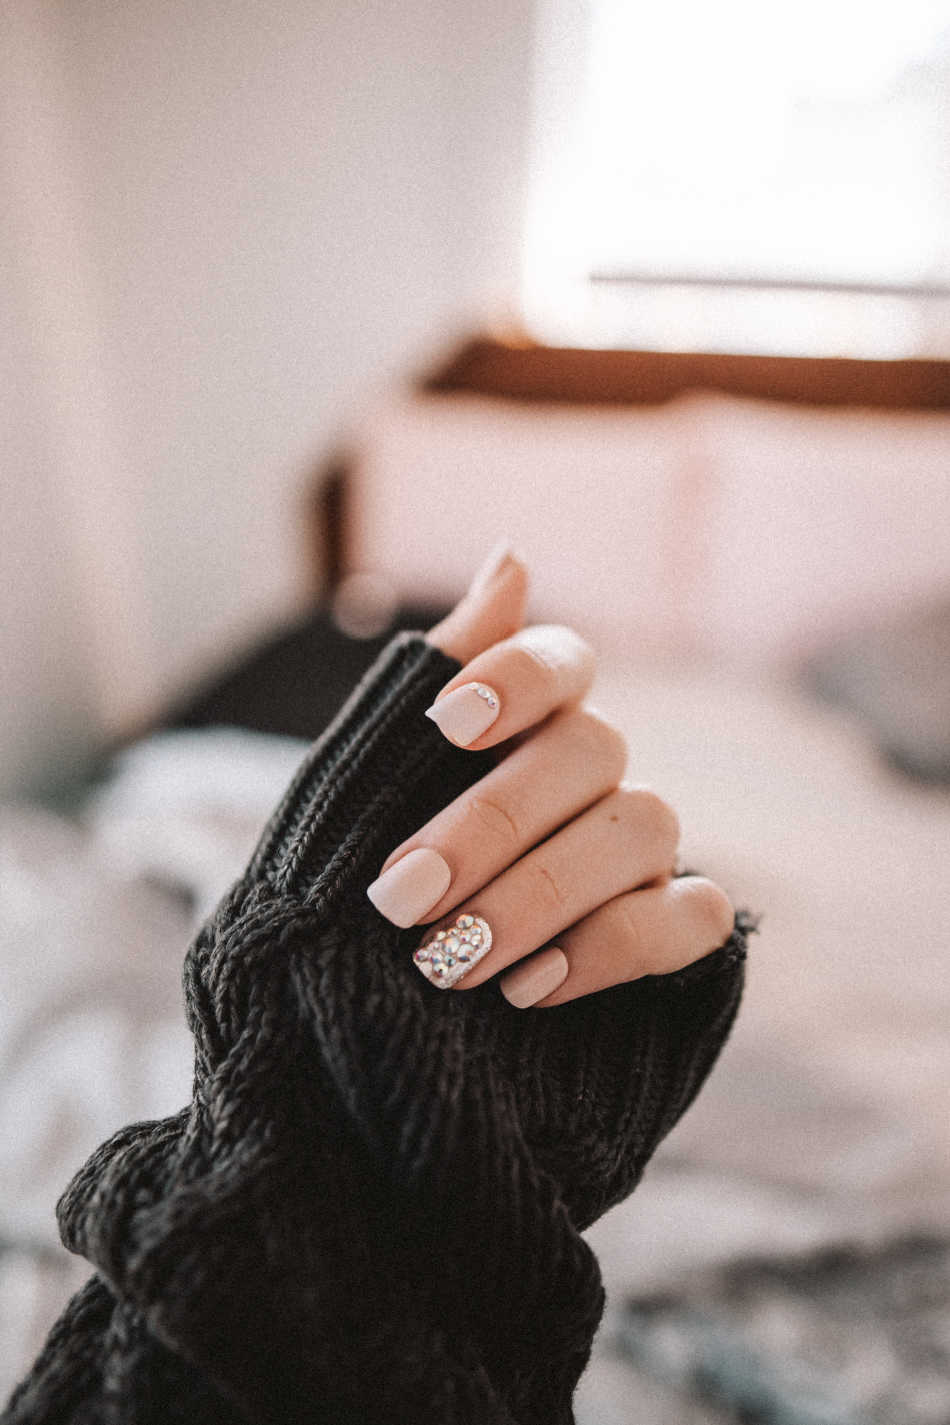 10 Easy Steps to Give Yourself A Non-Toxic Home Manicure and Pedicure | Growing Up Herbal | Learn how to give yourself a non-toxic home manicure and pedicure in as little as 10 easy steps (and several reasons why you should). 